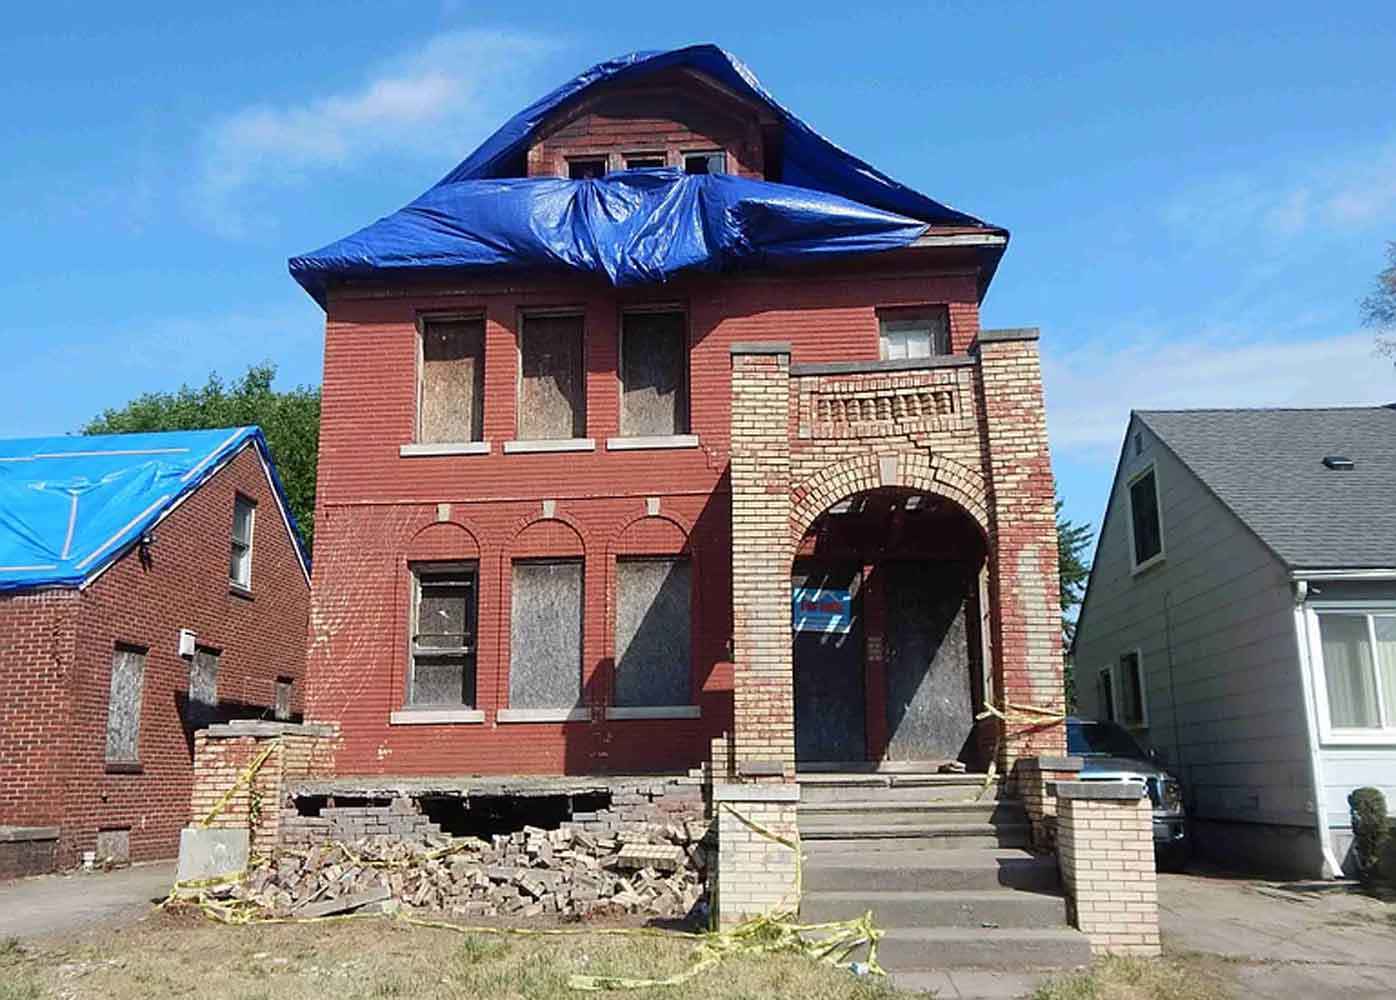 This six-bedroom home is on sale for A$1500, but it is in a dreadful state.